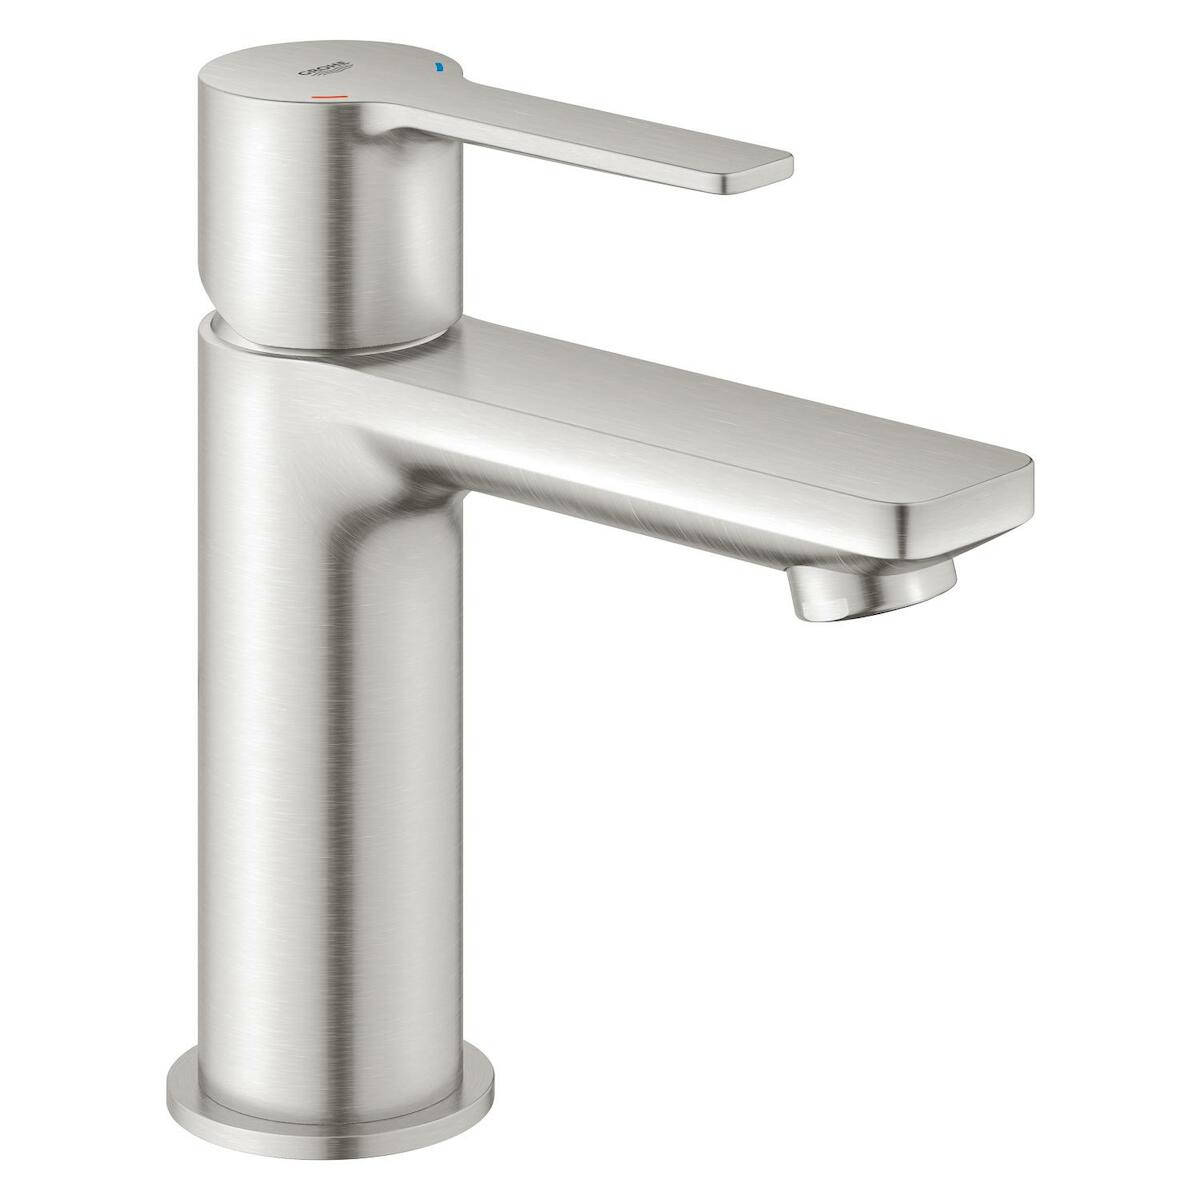 Umyvadlová baterie Grohe Lineare s clic-clacem supersteel 23791DC1 Grohe